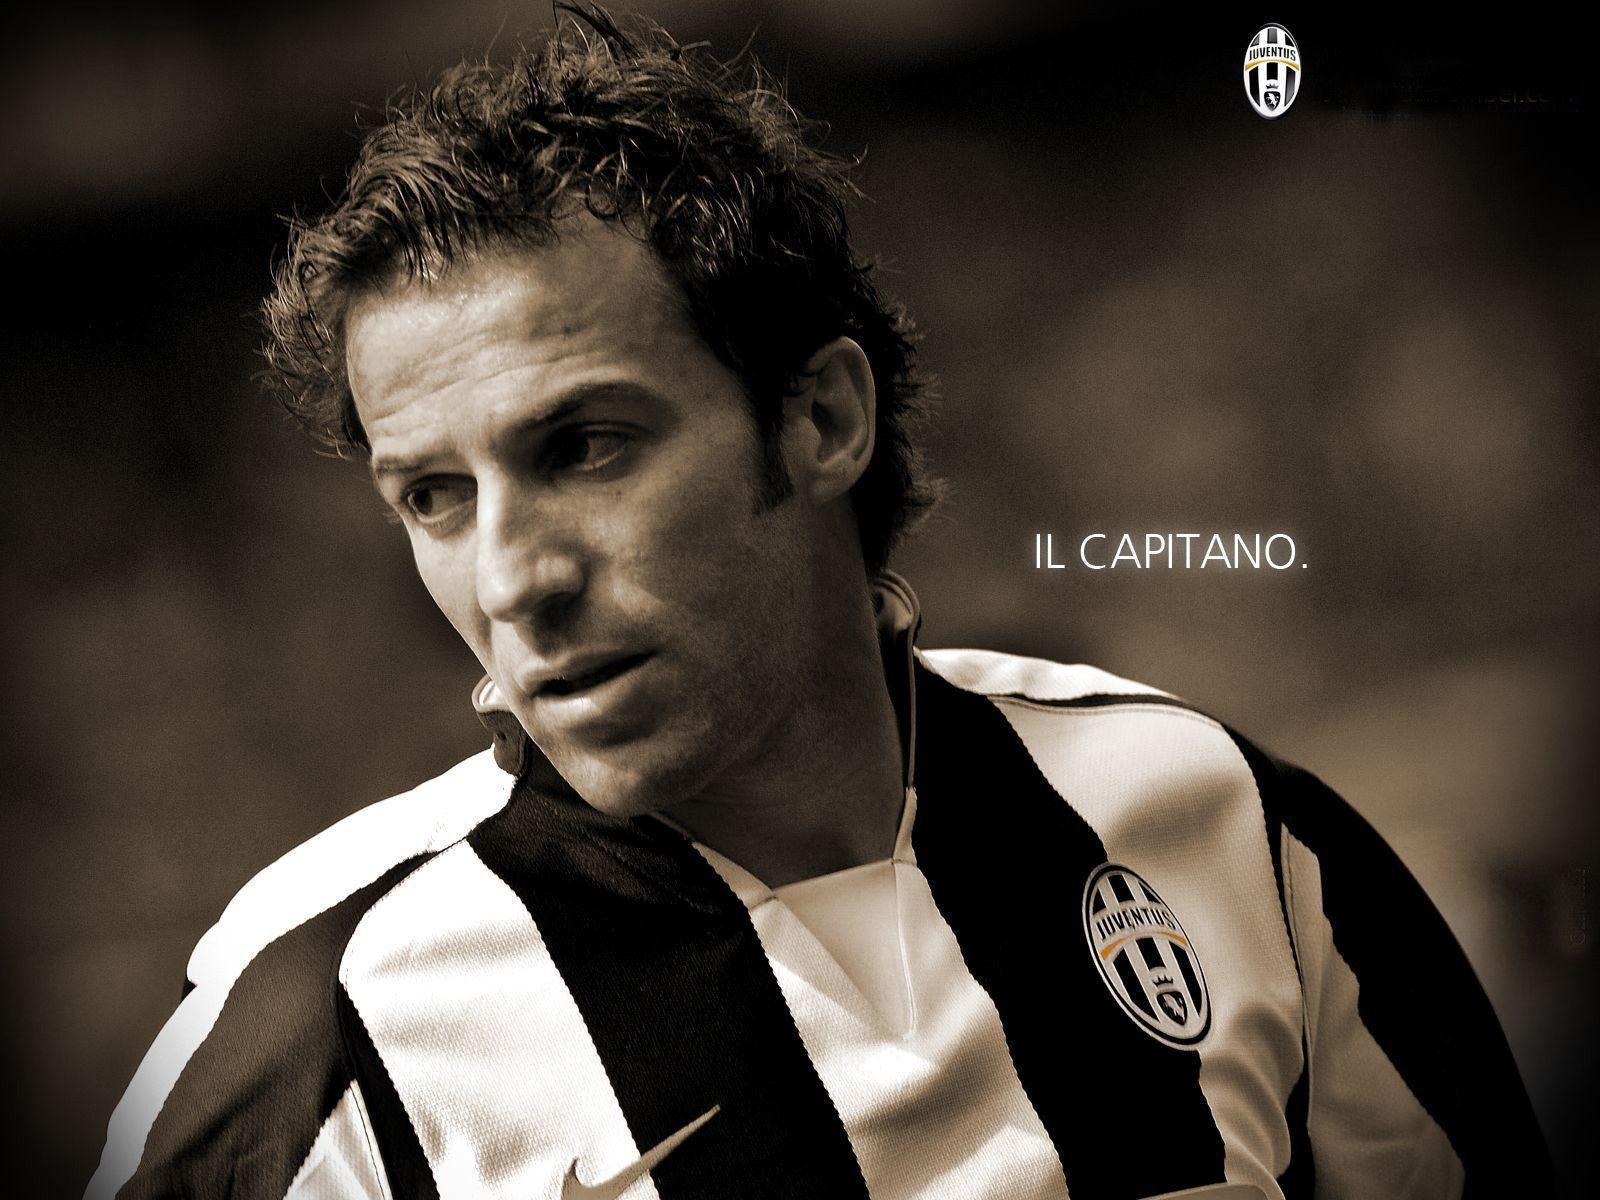 Alessandro Del Piero Juventus jersey black and white photography